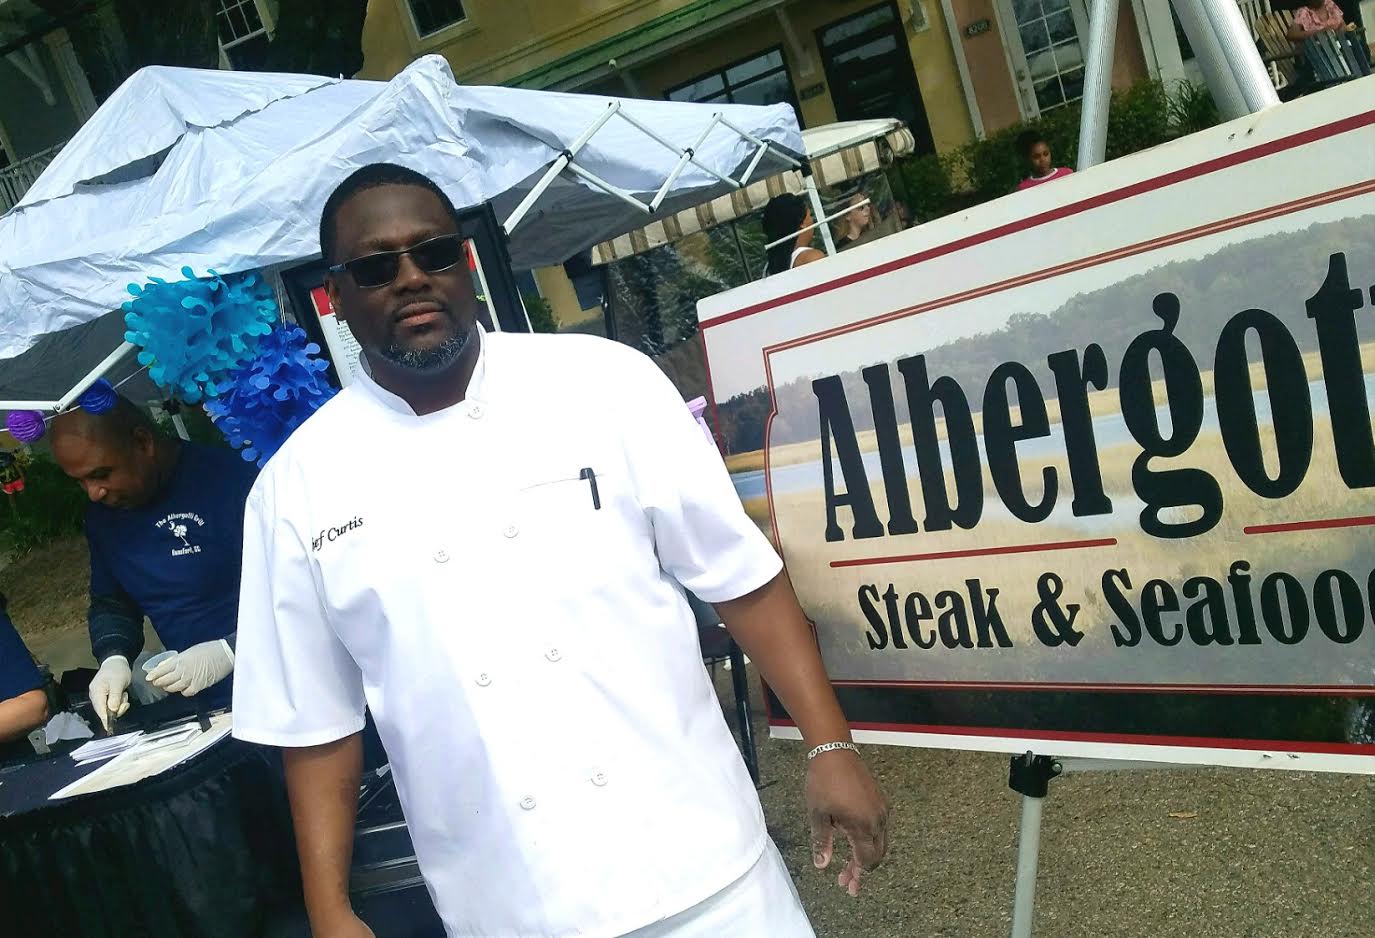 Chef Curtis Epps repeats as winner of Shrimp & Grits Cook-Off, takes home $1,000